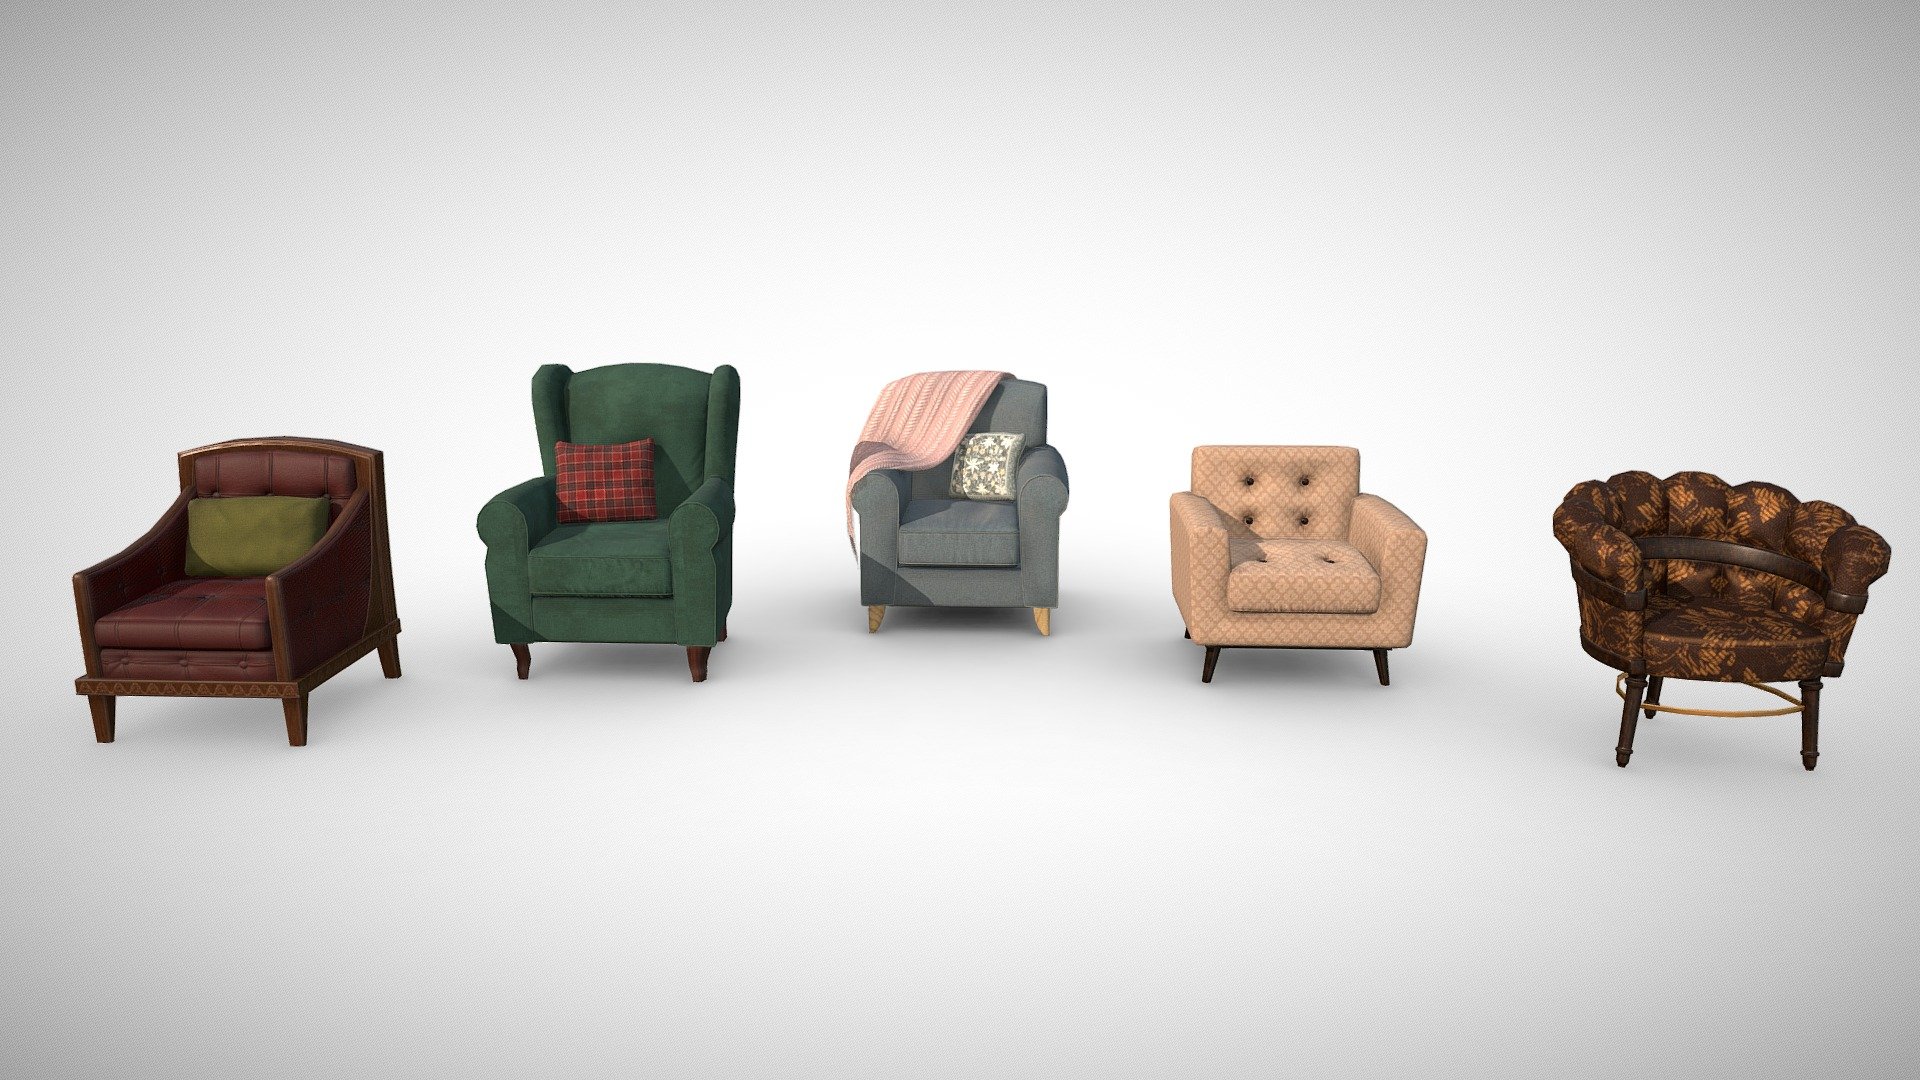 The Collection consists of 5 low poly, game ready armchairs. Models range from 2200 - 5000 tris.

Each mesh has it’s own texture set: PBR Metalness Workflow. Texture sizes: 2048 x 2048.

Alternative textures included for all models (excluding Comfy Armchair) 3d model